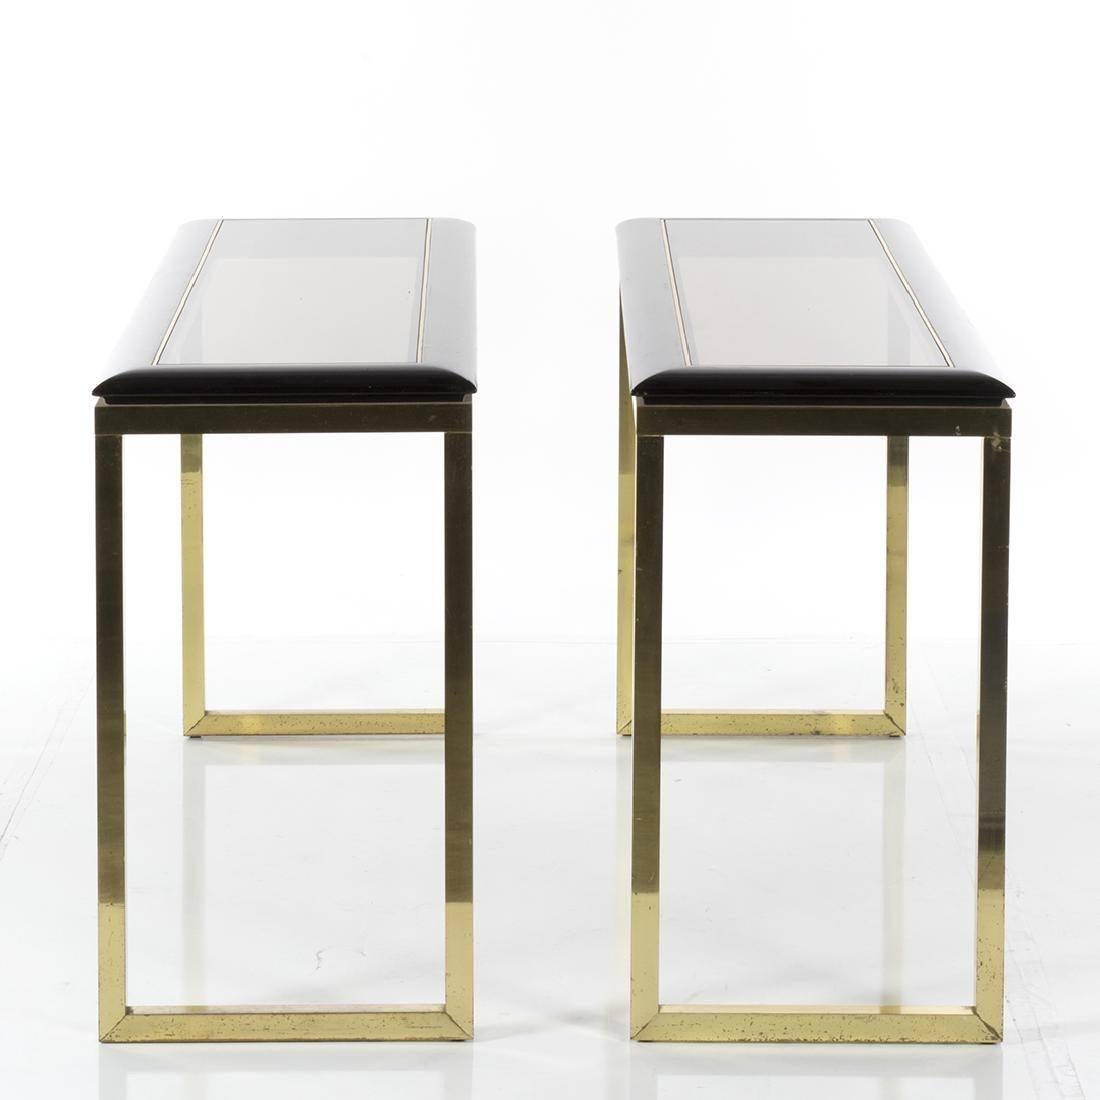 Pair of console tables in ebonized oak and brass, 1970s. Measures: 29